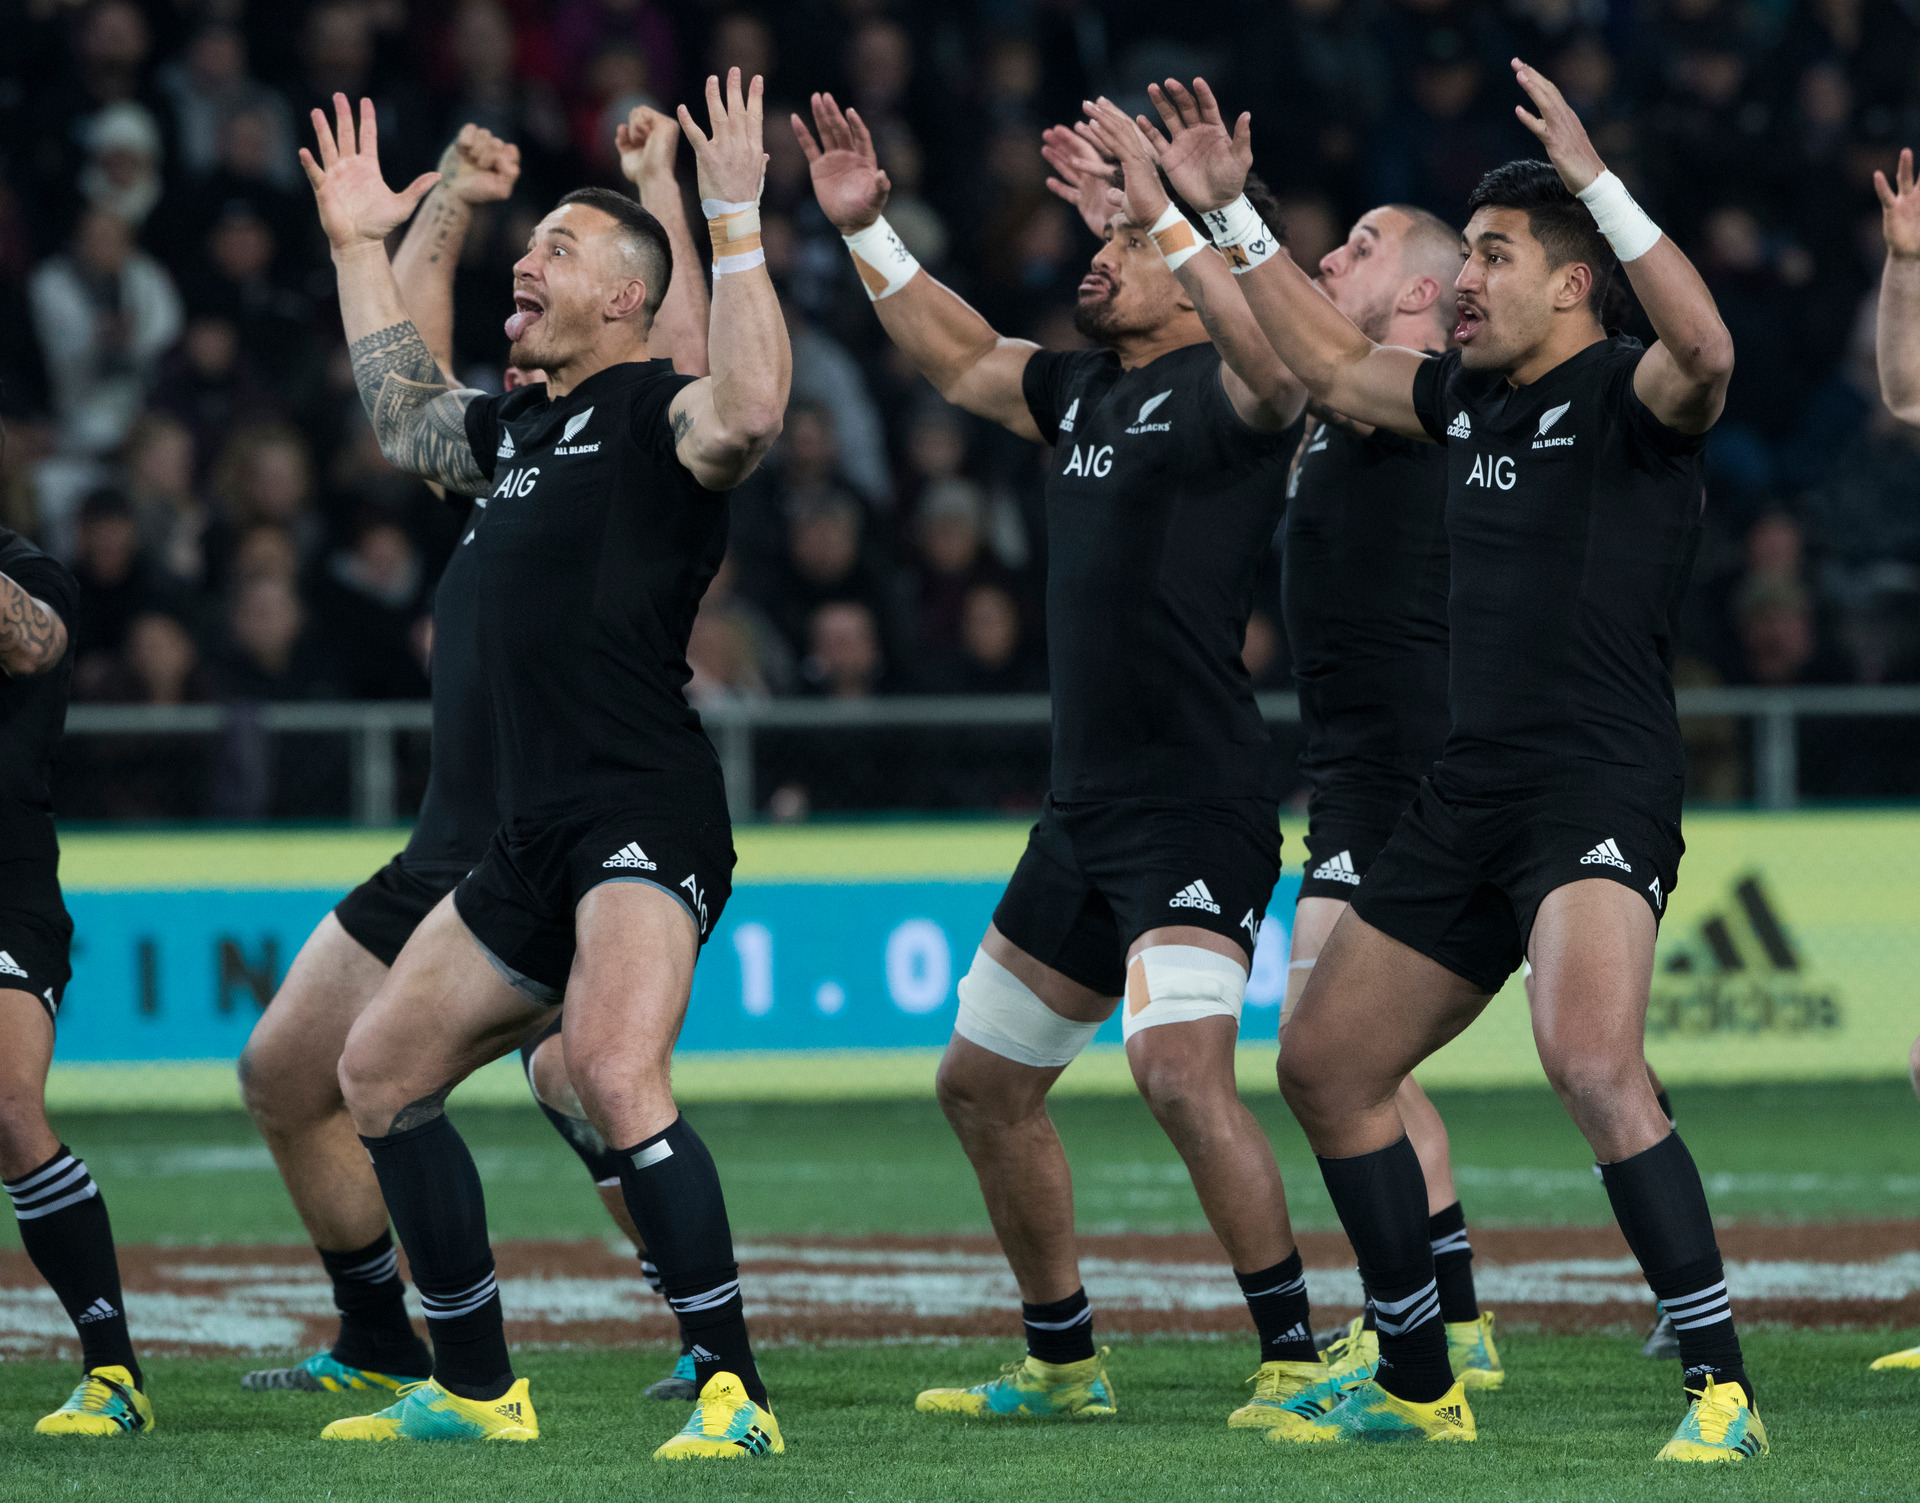 teller betreuren In zicht Misuse of haka Ka Mate 'tramples' on mana, call for greater protection in New  Zealand and overseas - NZ Herald